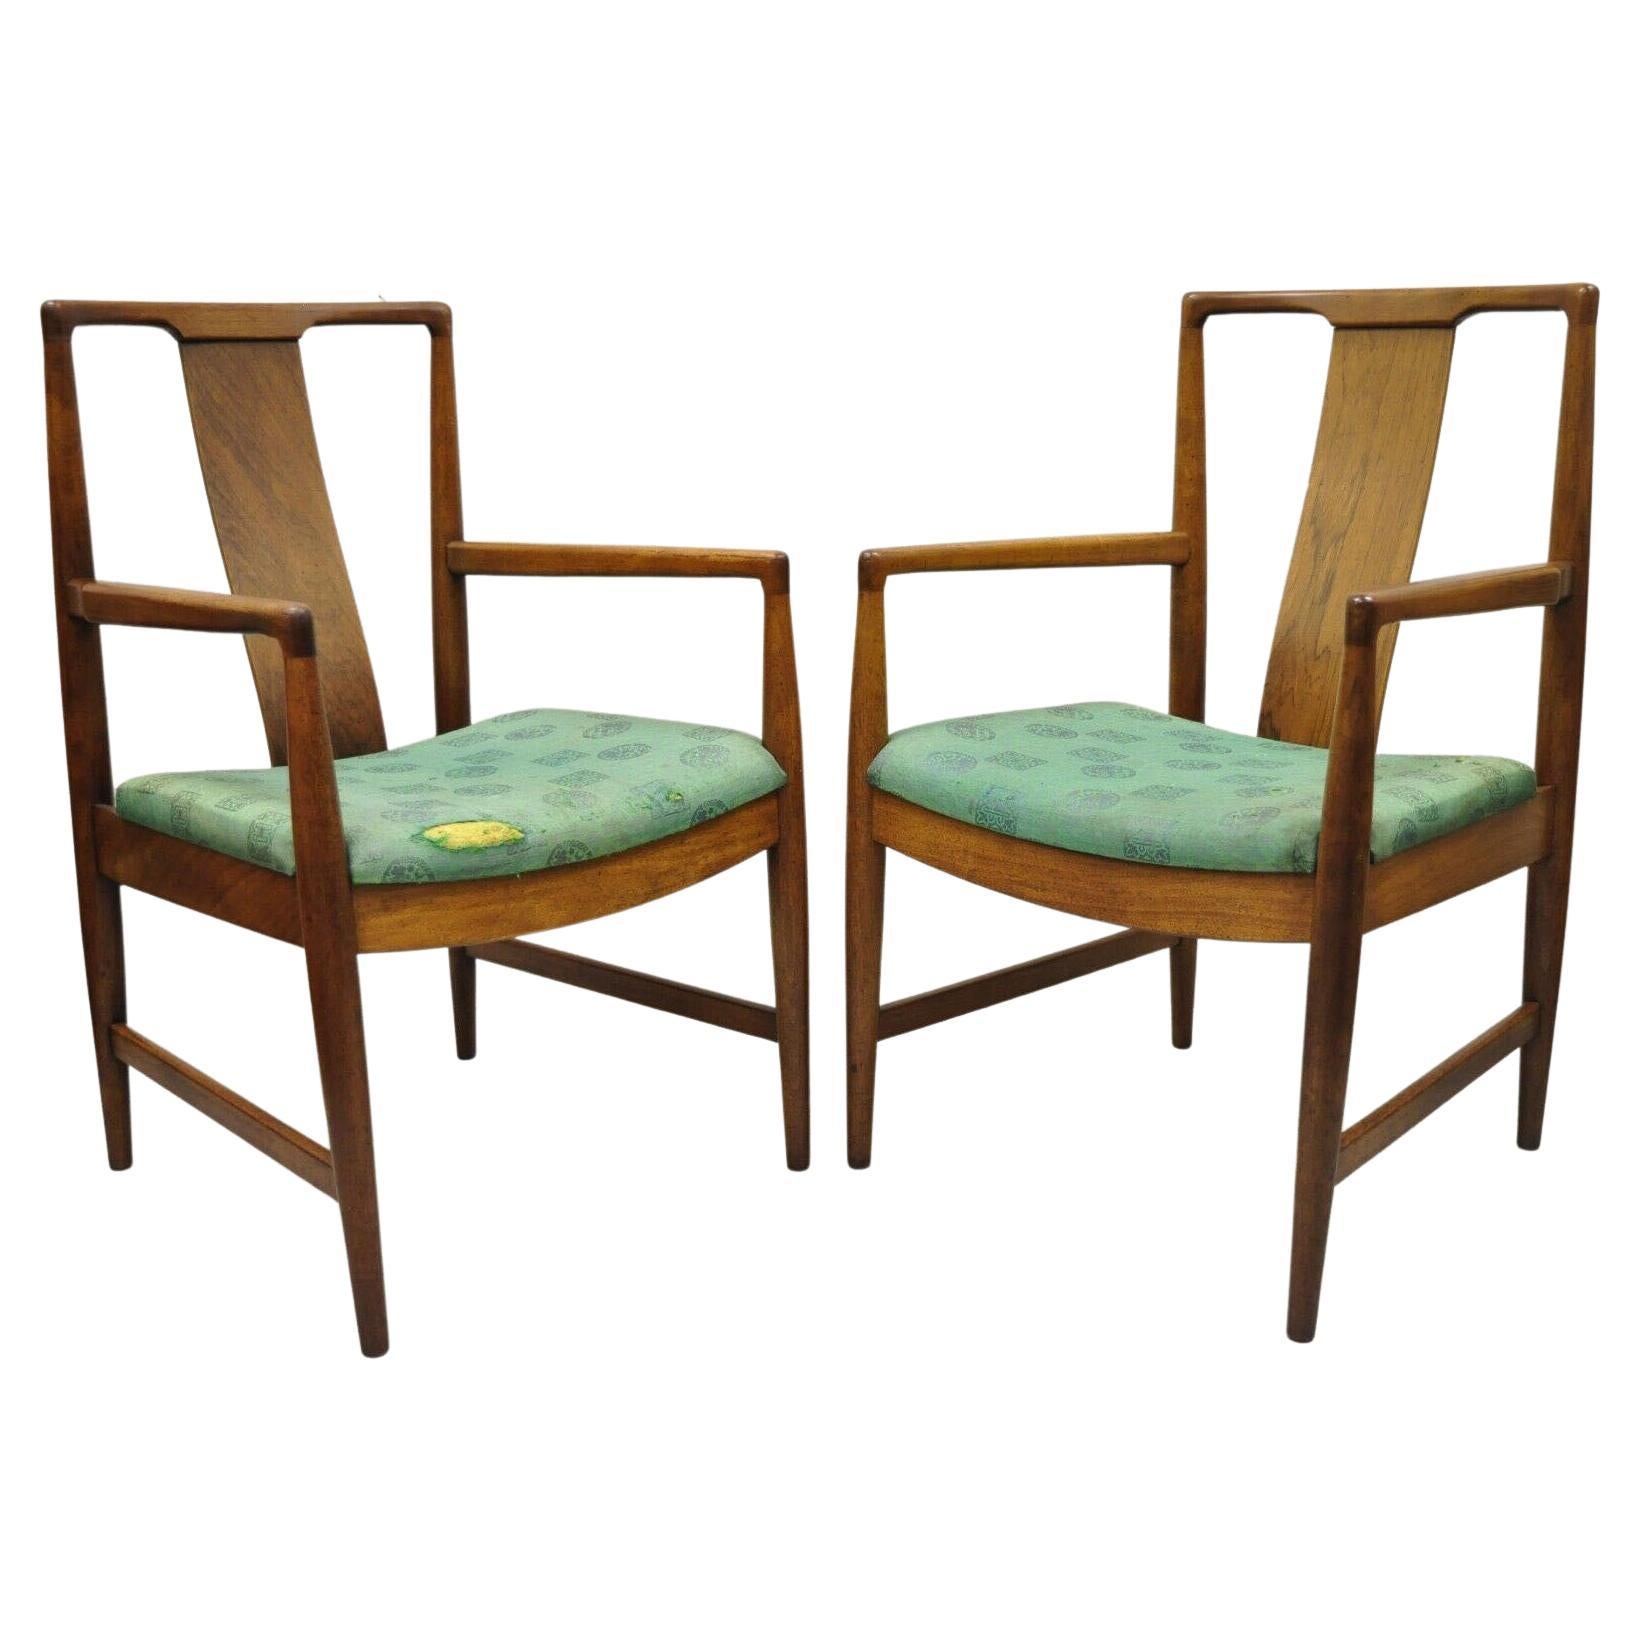 Mid-Century Modern Walnut Curved Angled Back Dining Arm Chairs - a Pair For Sale